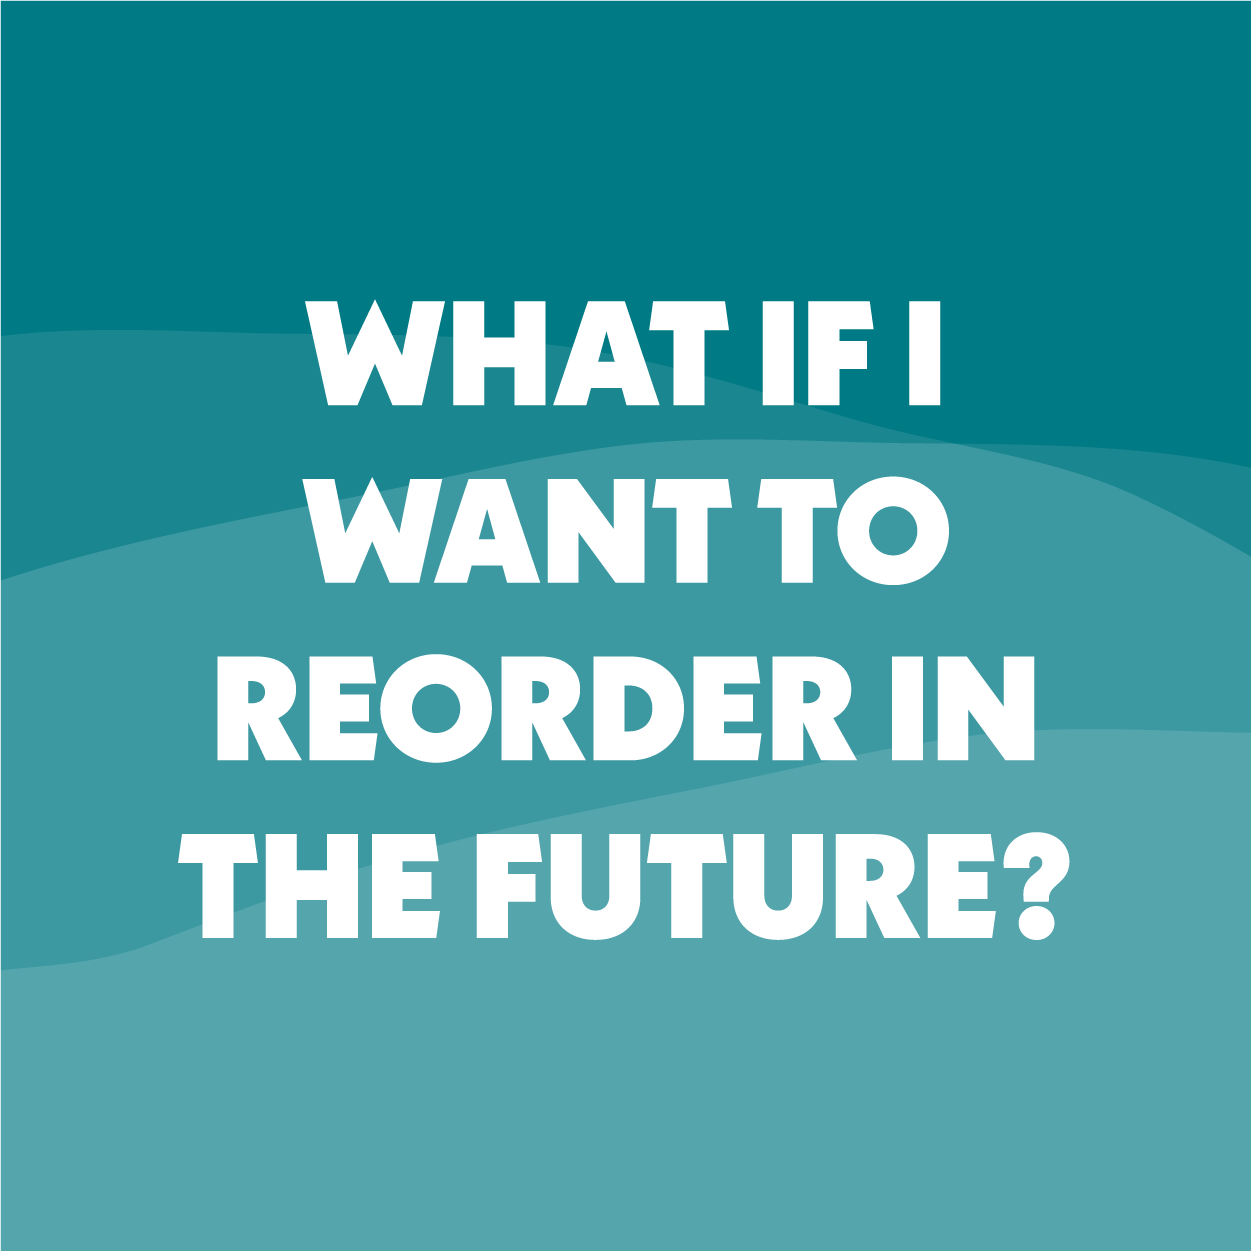 Want to reorder in the future?